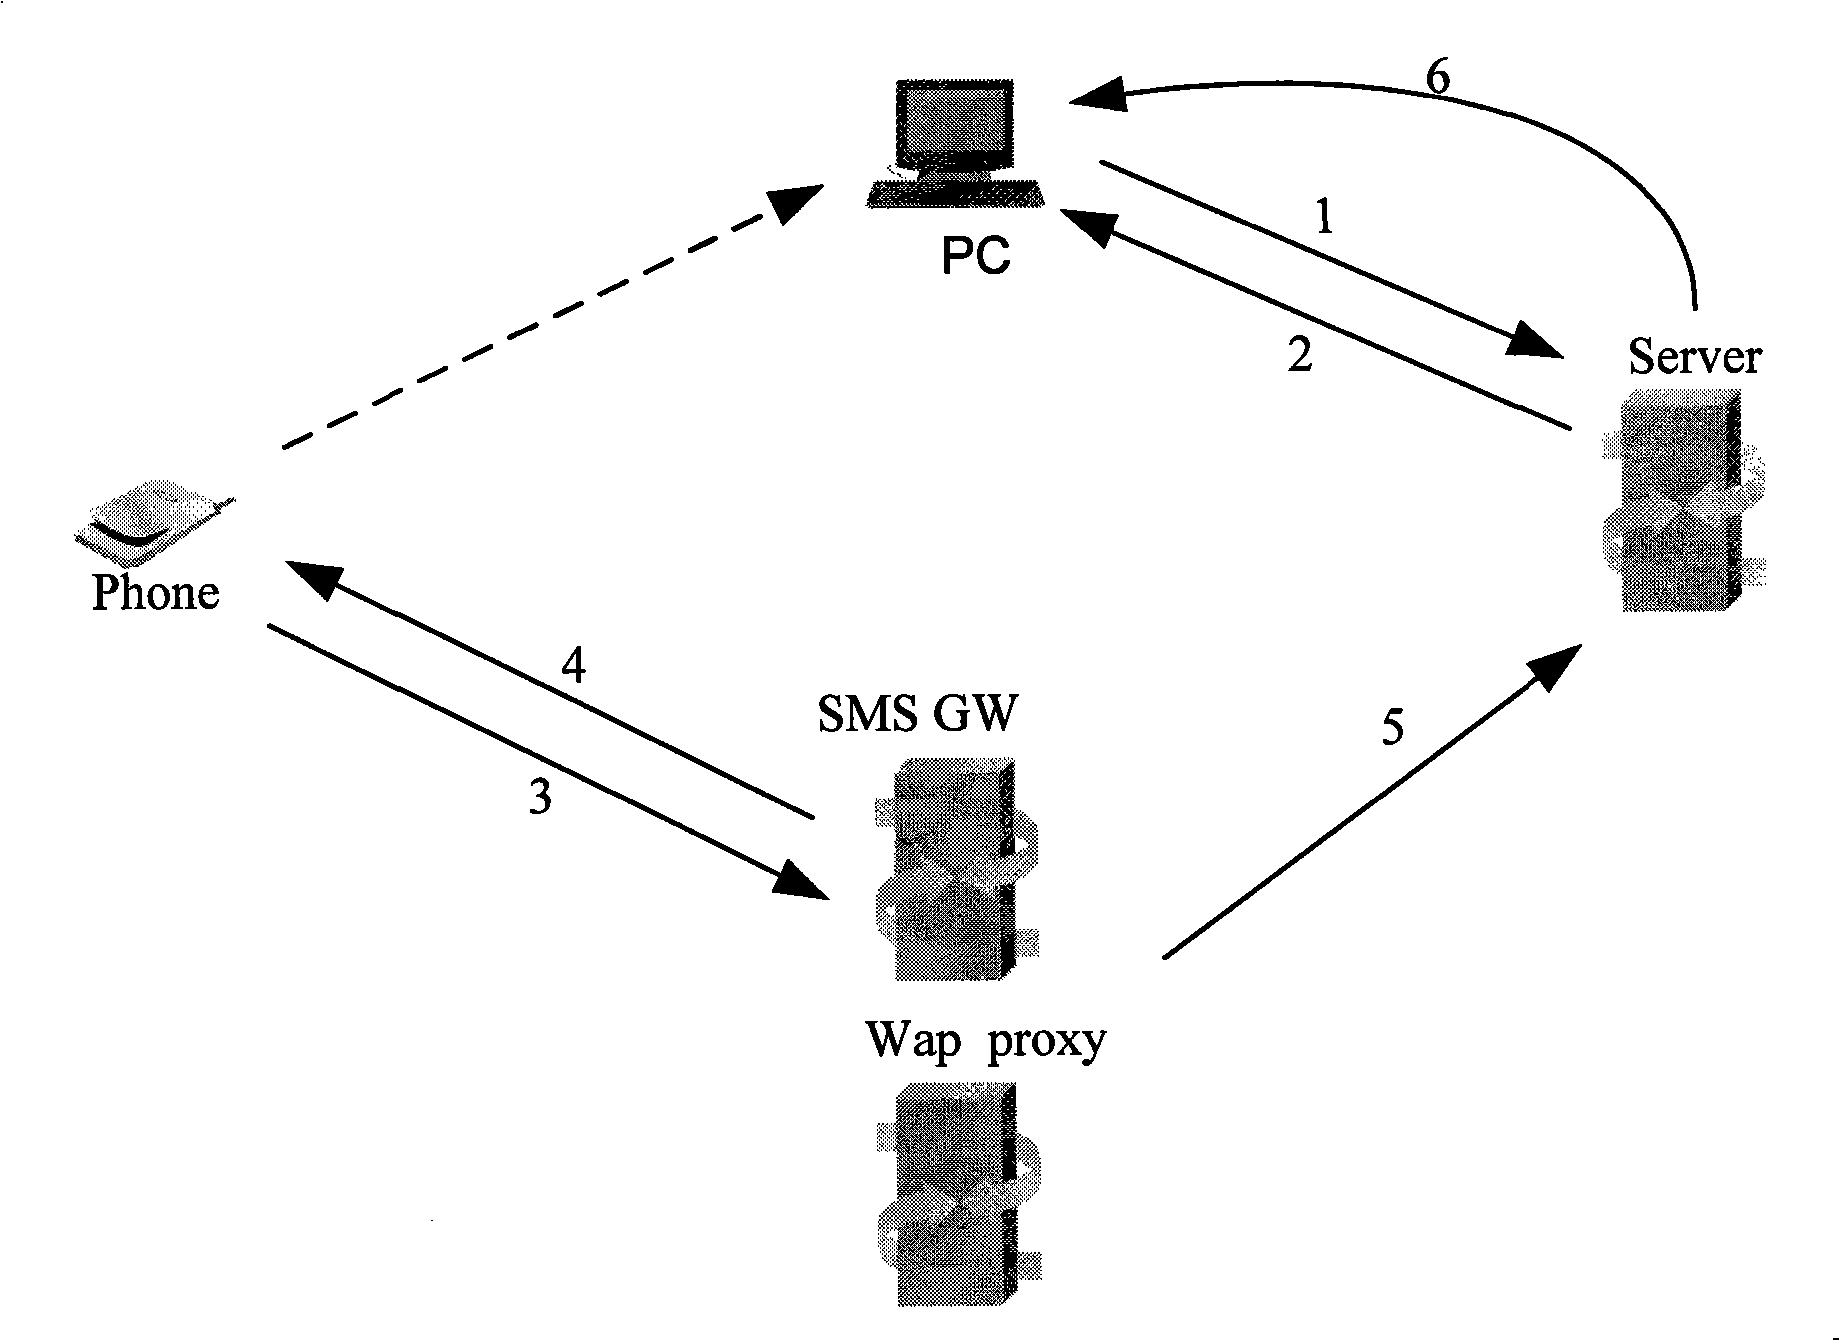 Method for remote controlling computer by mobile phone